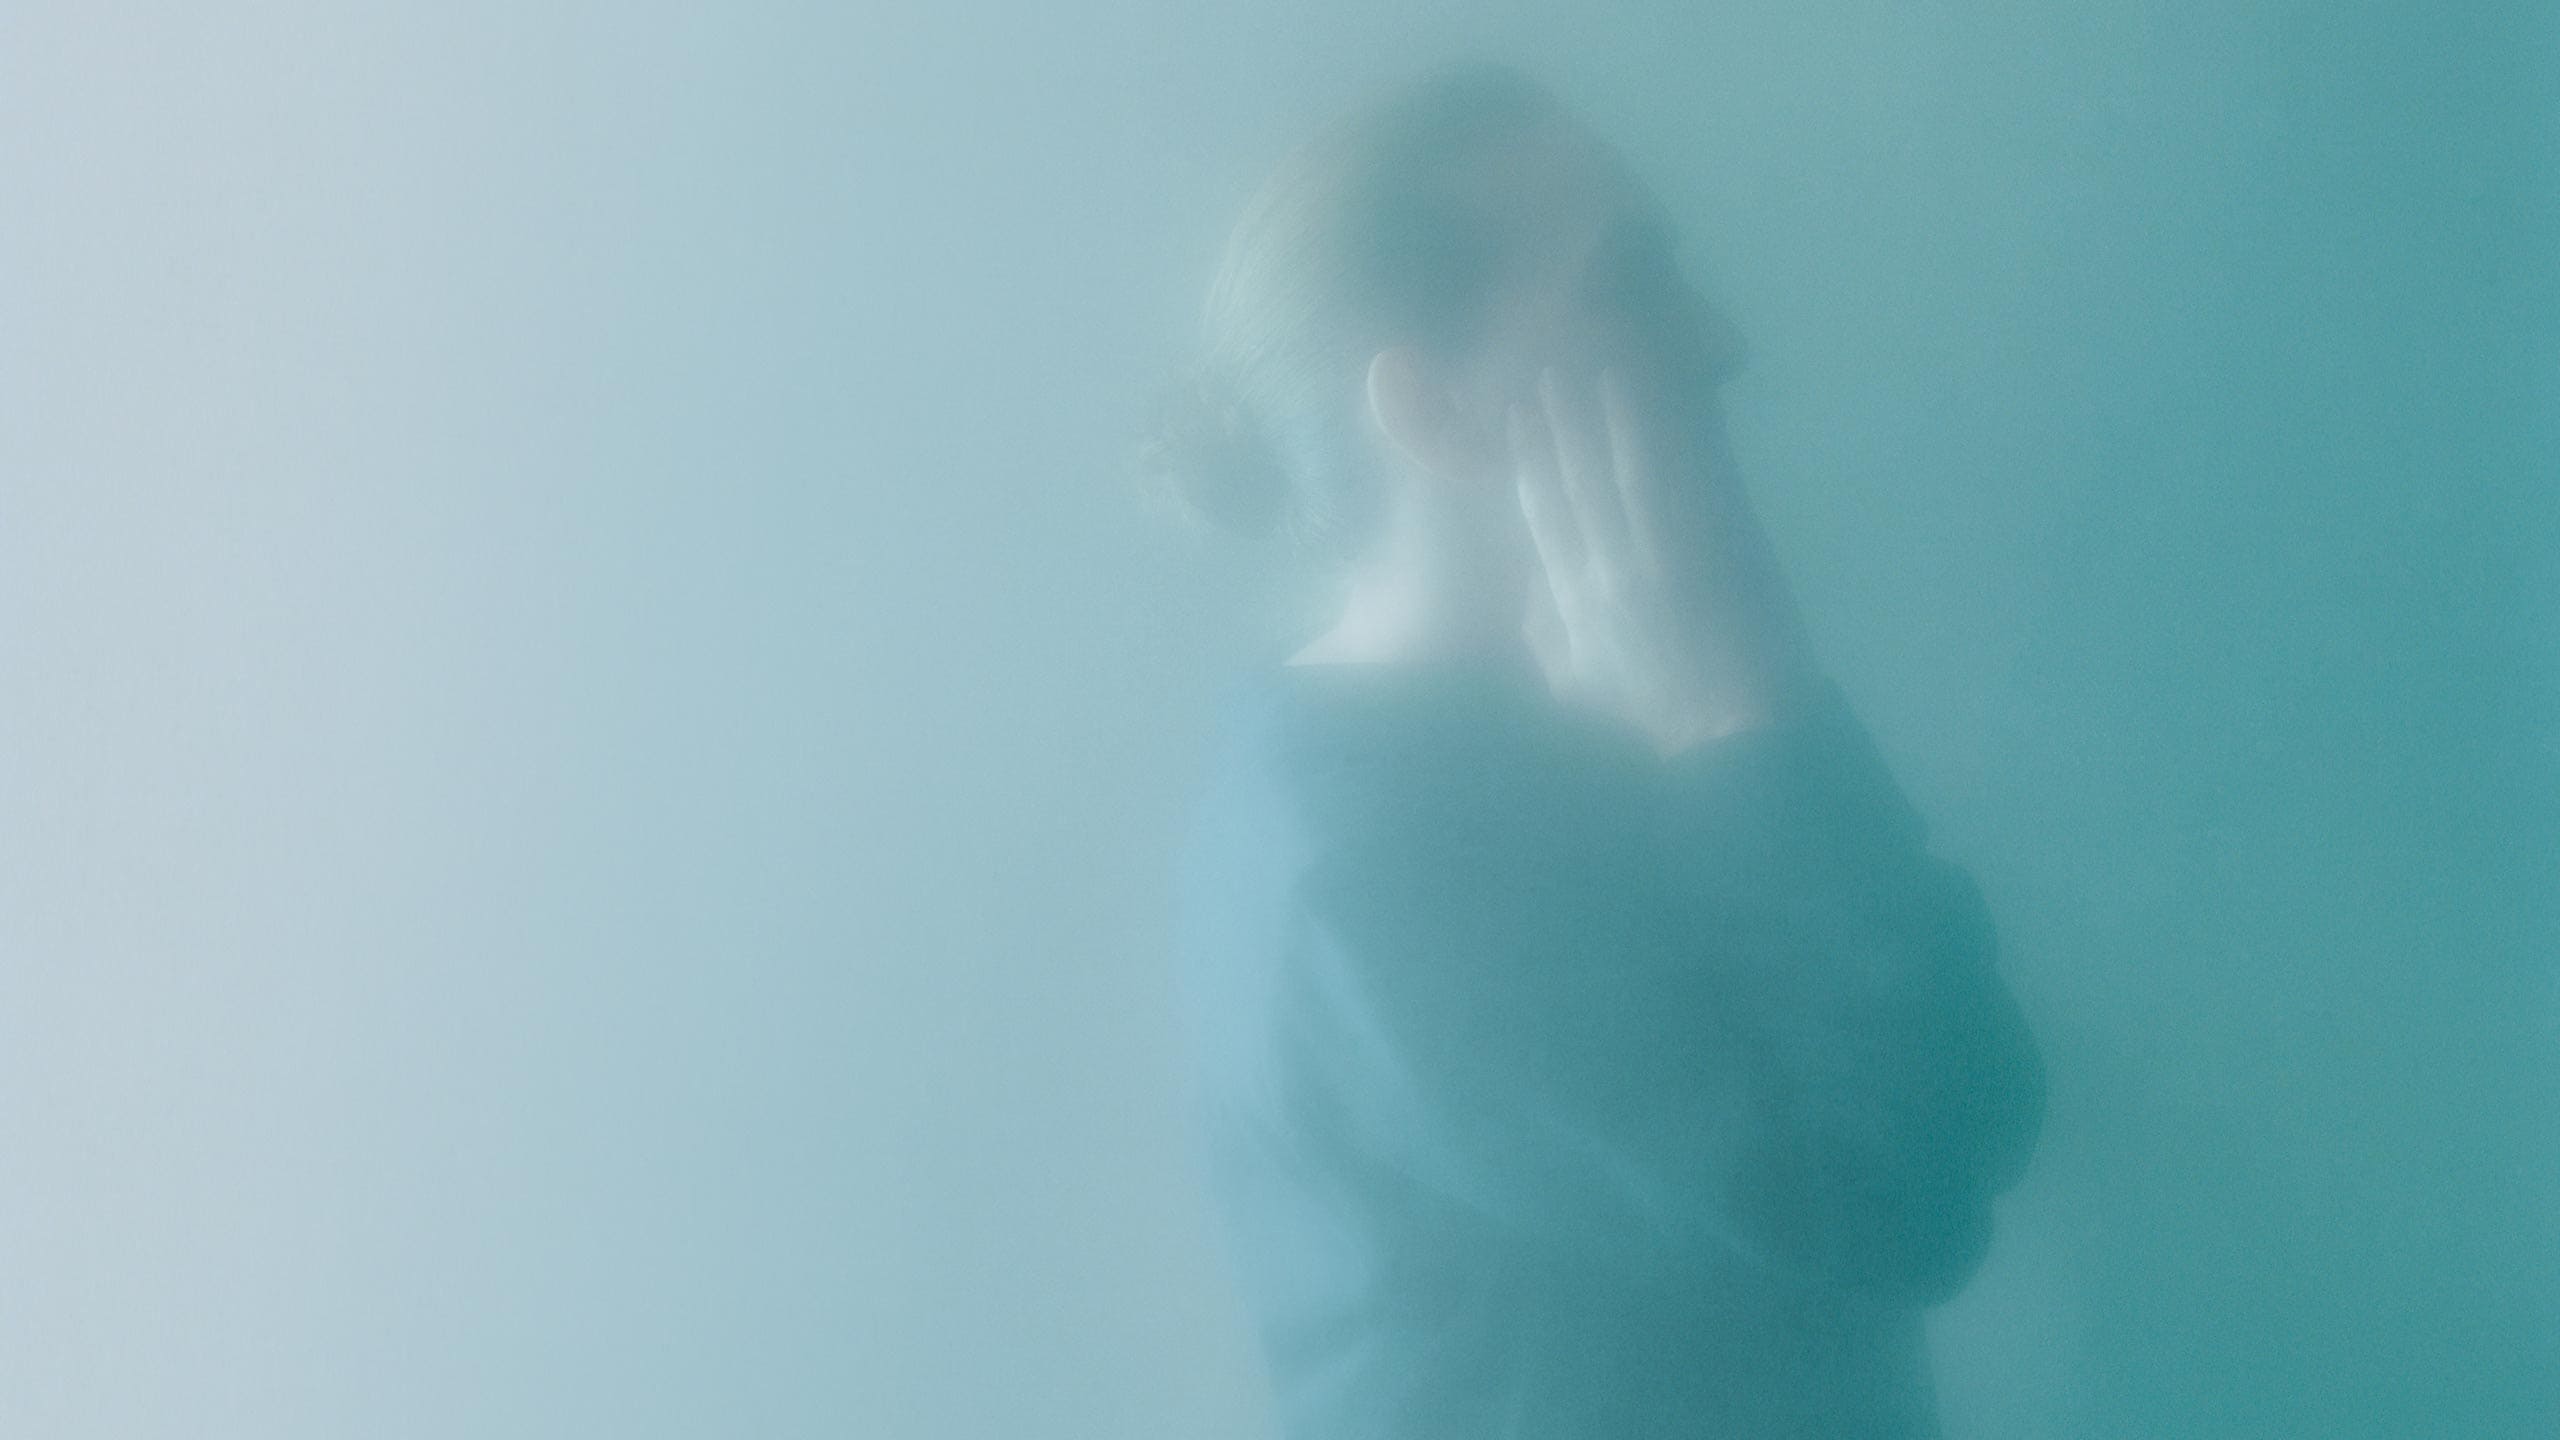 The profile of a figure applying serum to their face, obscured in a cyan haze.